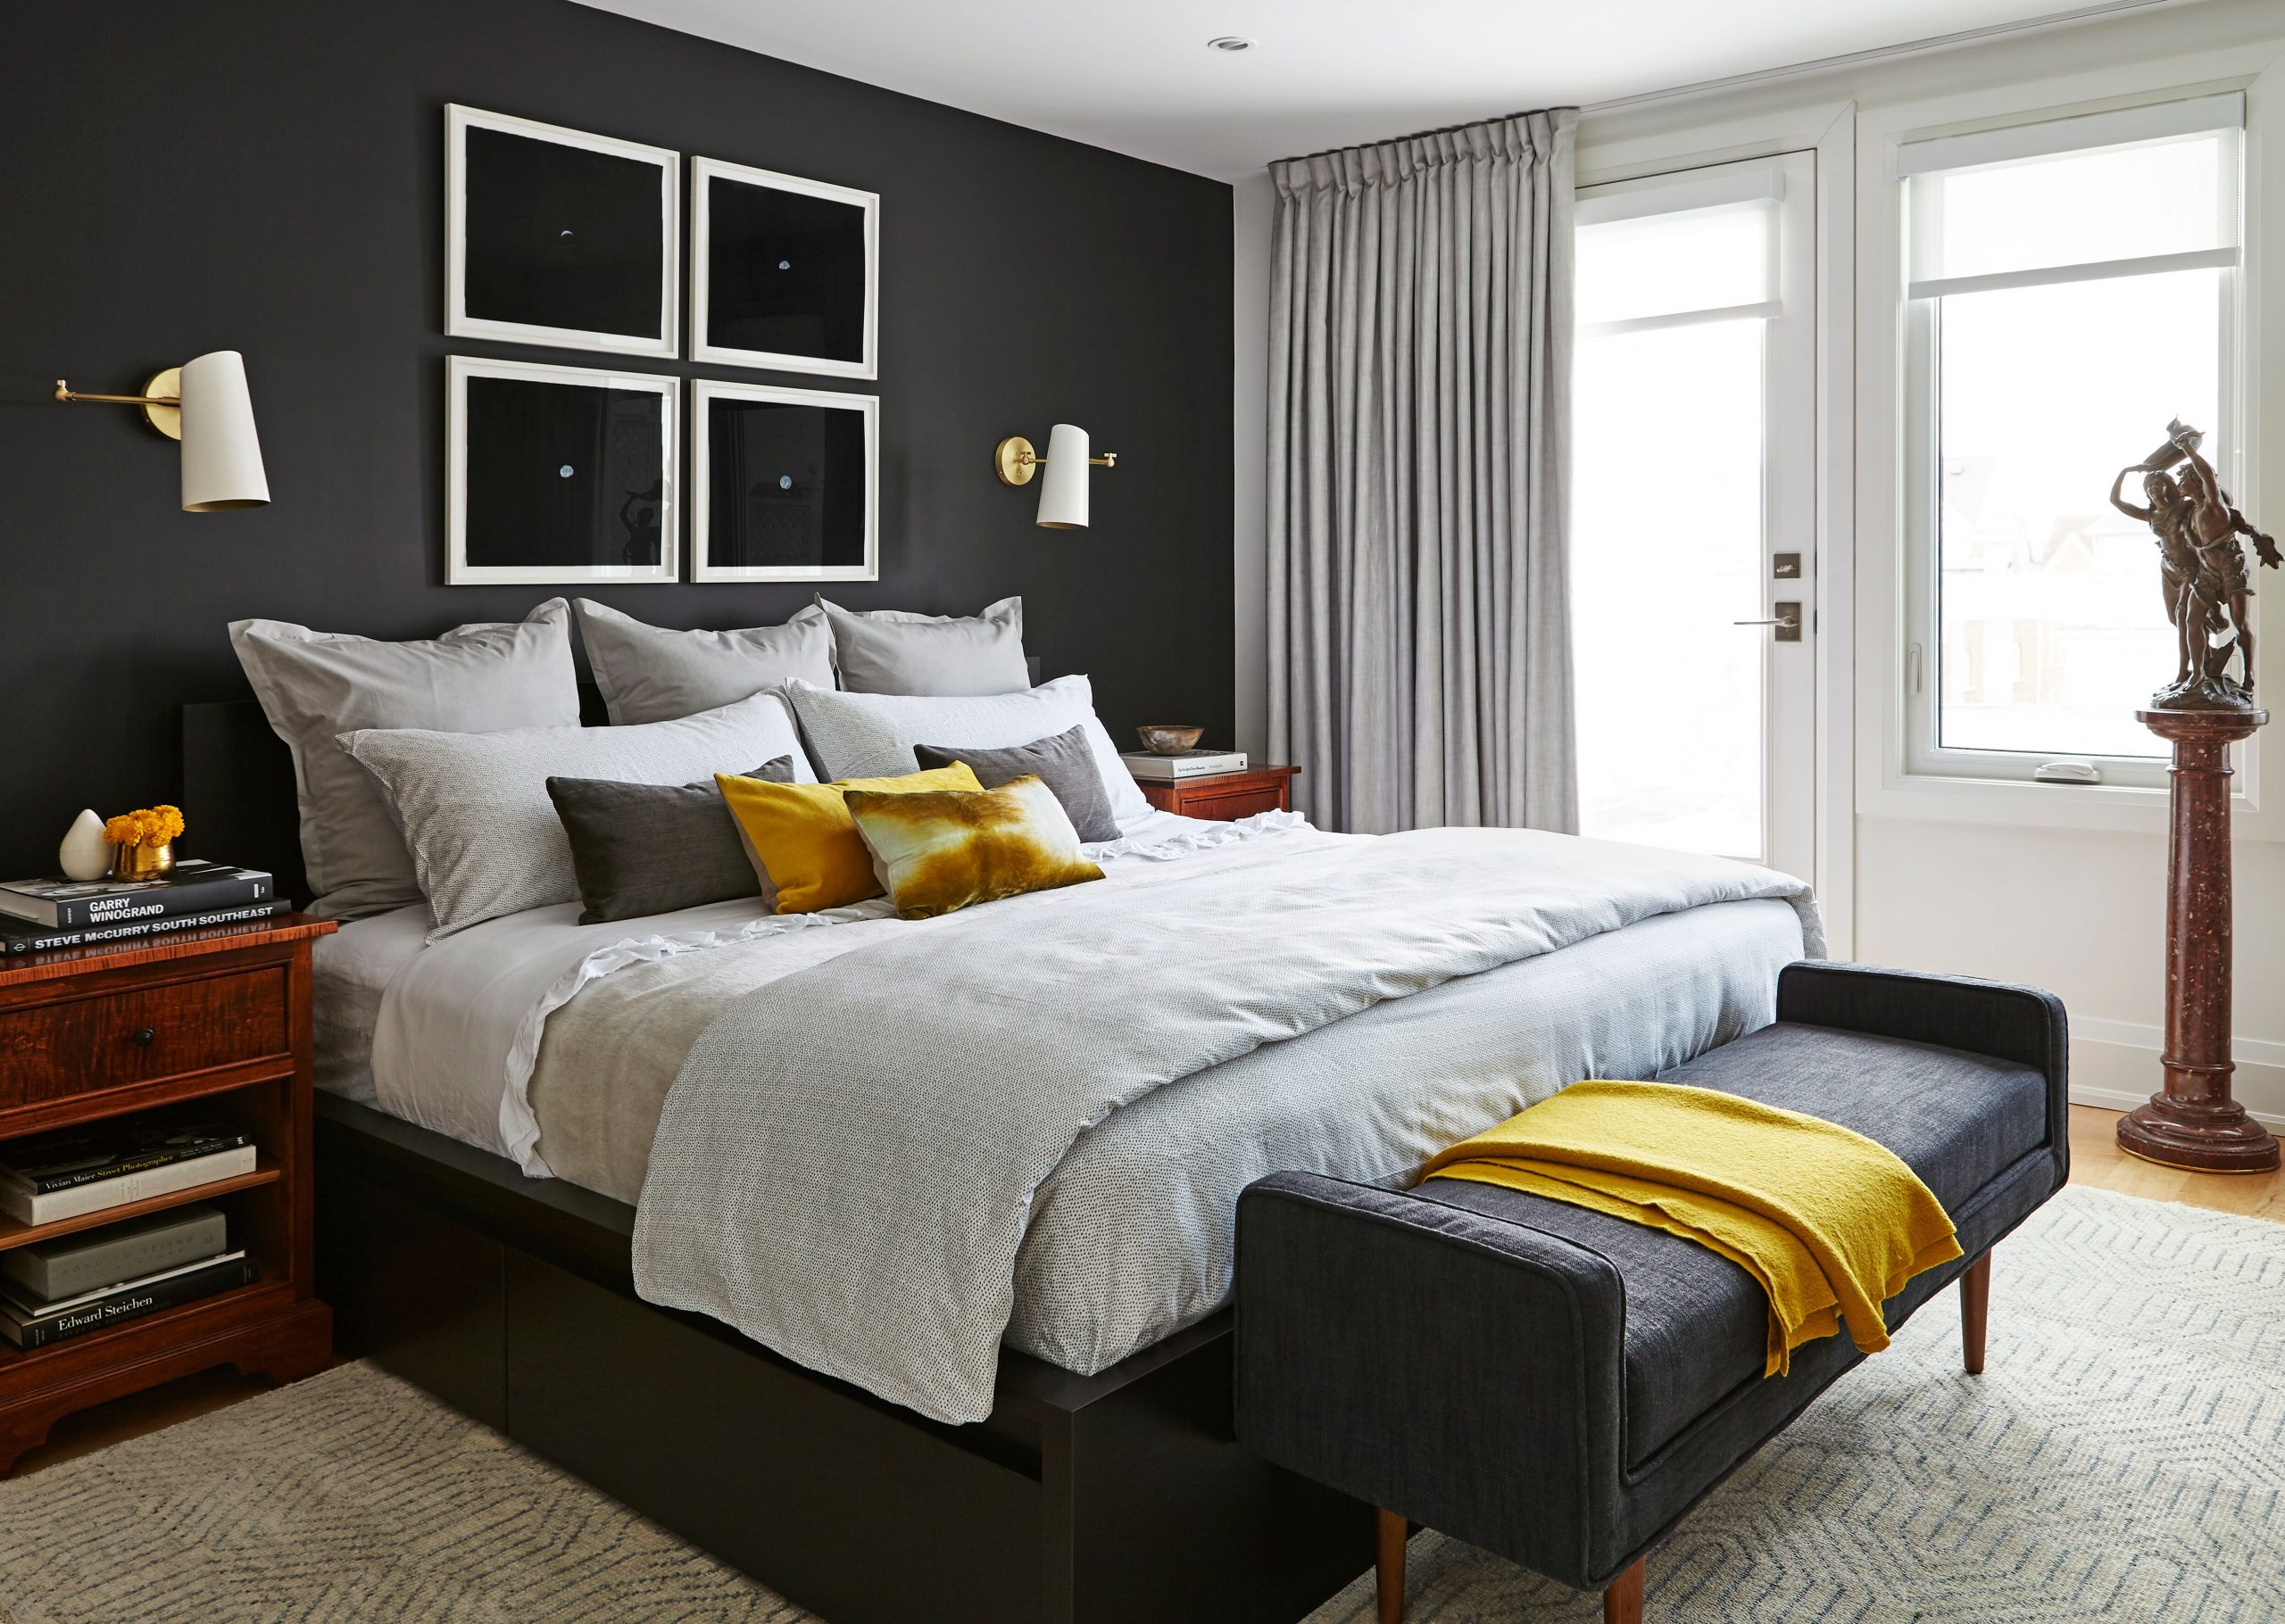 bedroom with black bed, black focal wall, grey bedding with mustard accents, statue on marble pedestal by window